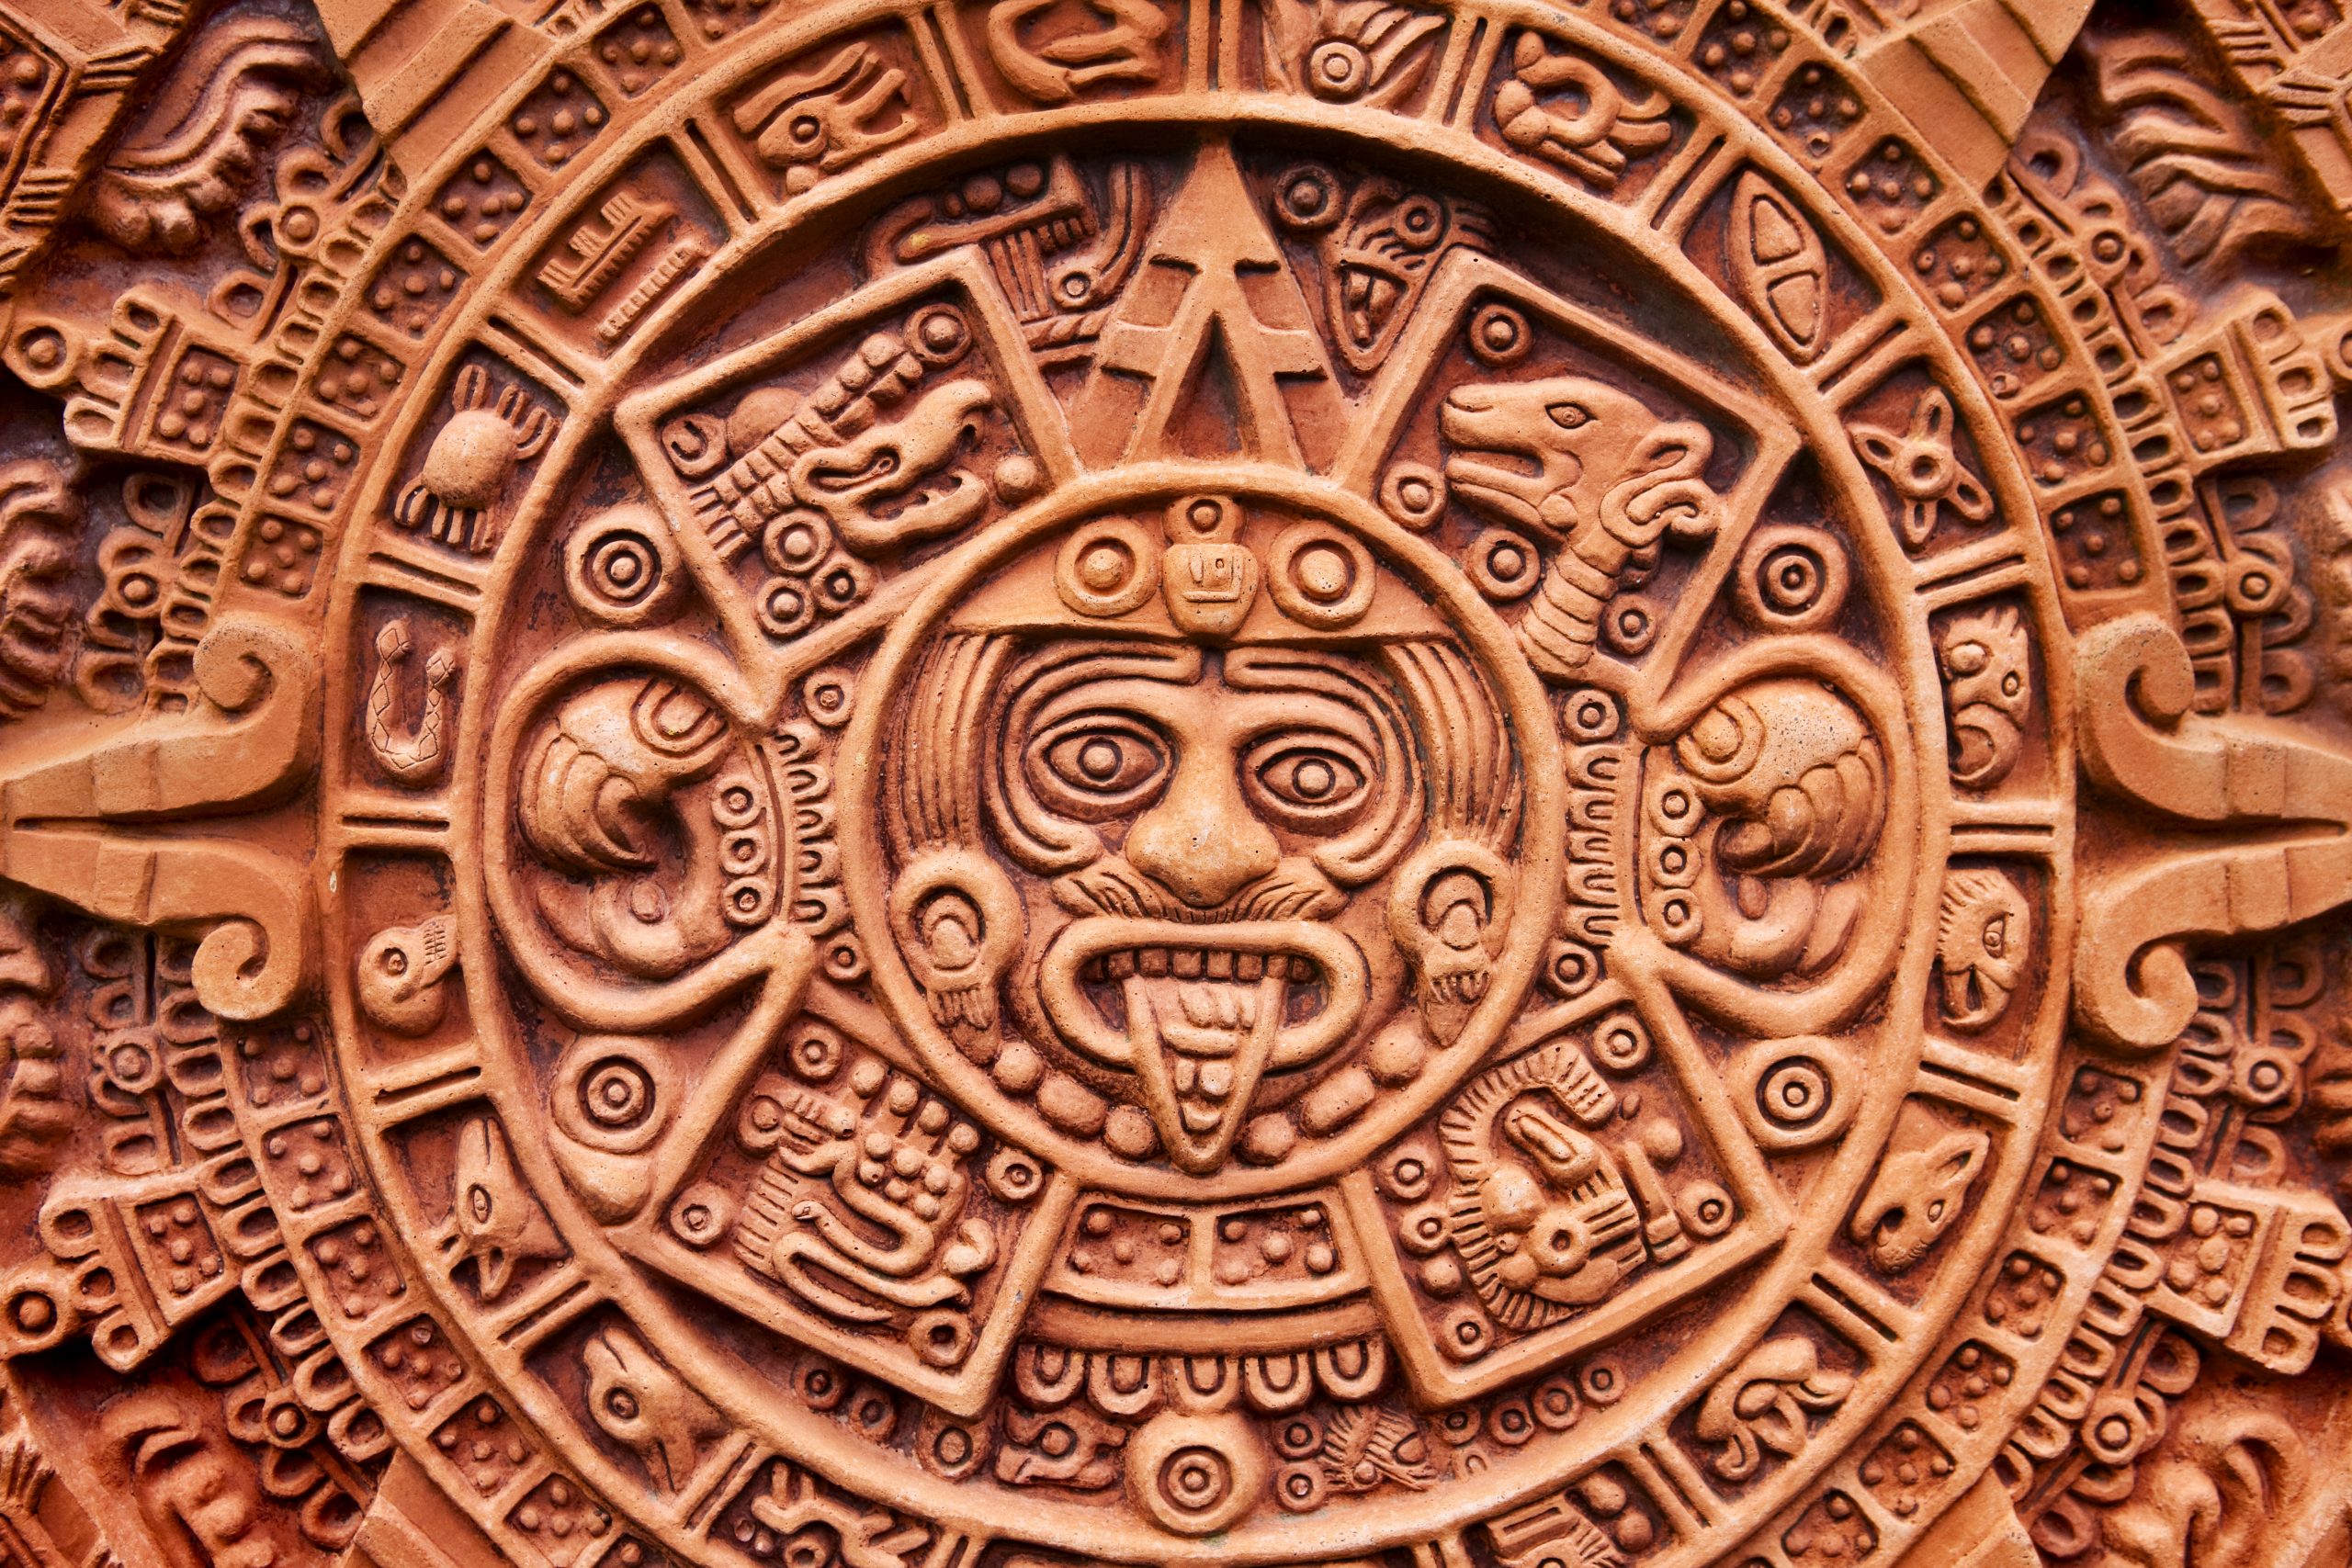 ‘Scariest sound in the world’ recreated by scientists is Aztec Death Whistle associated with human sacrifice